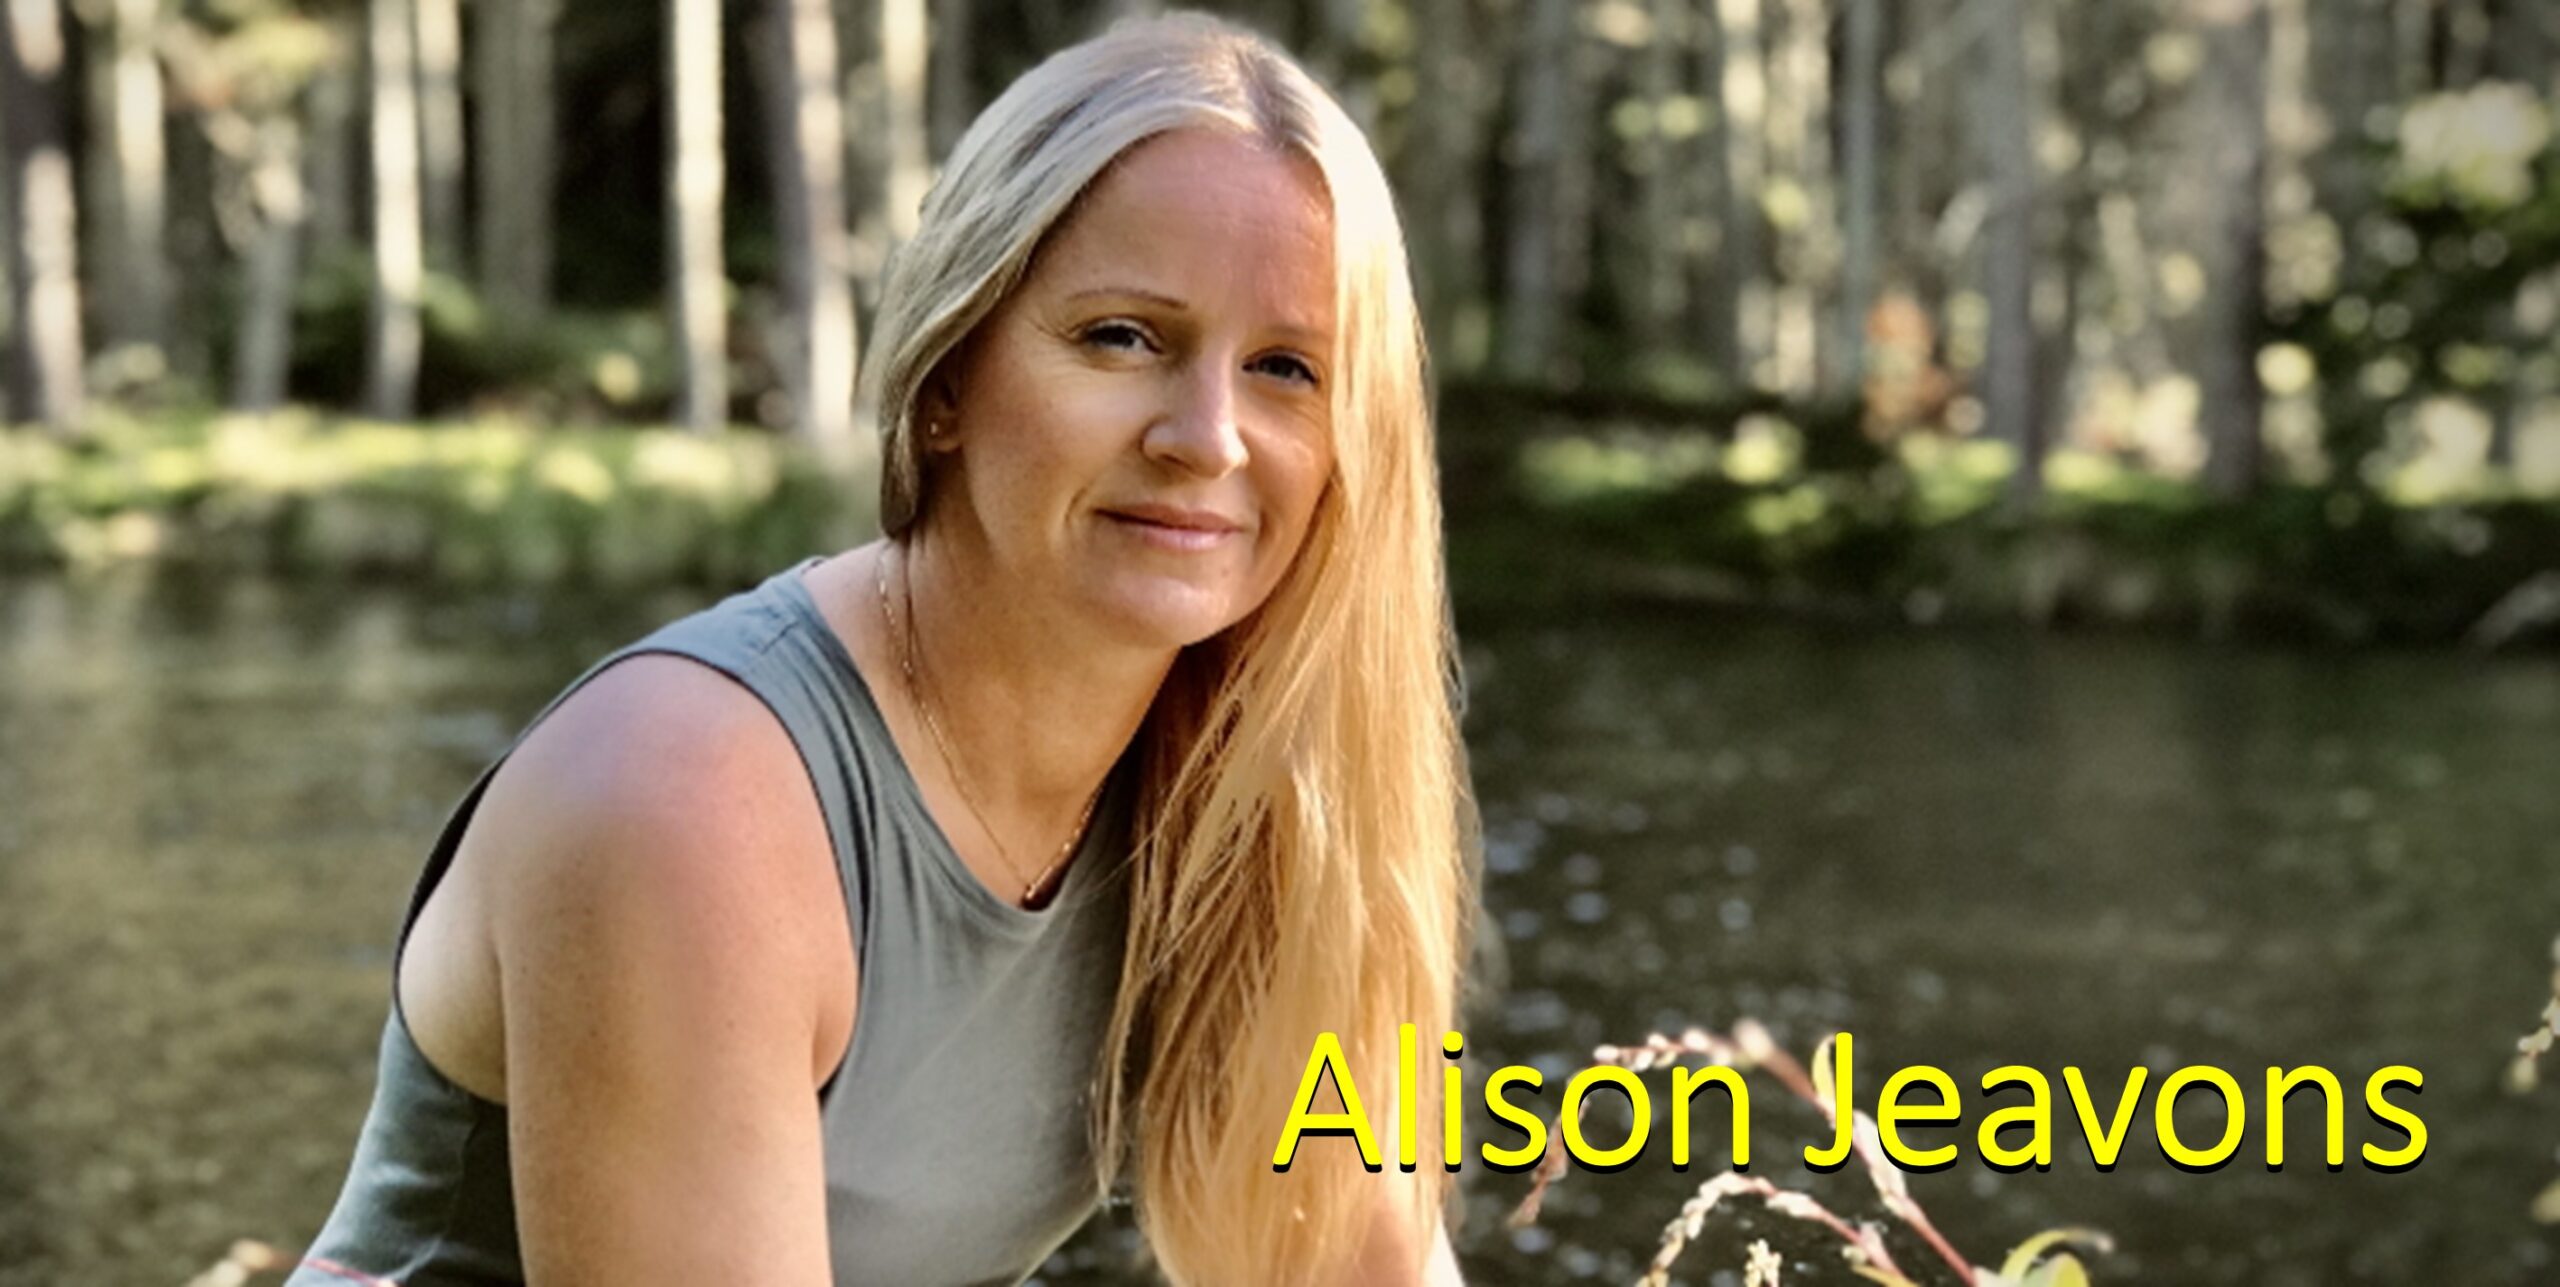 You are currently viewing Alison Jeavons